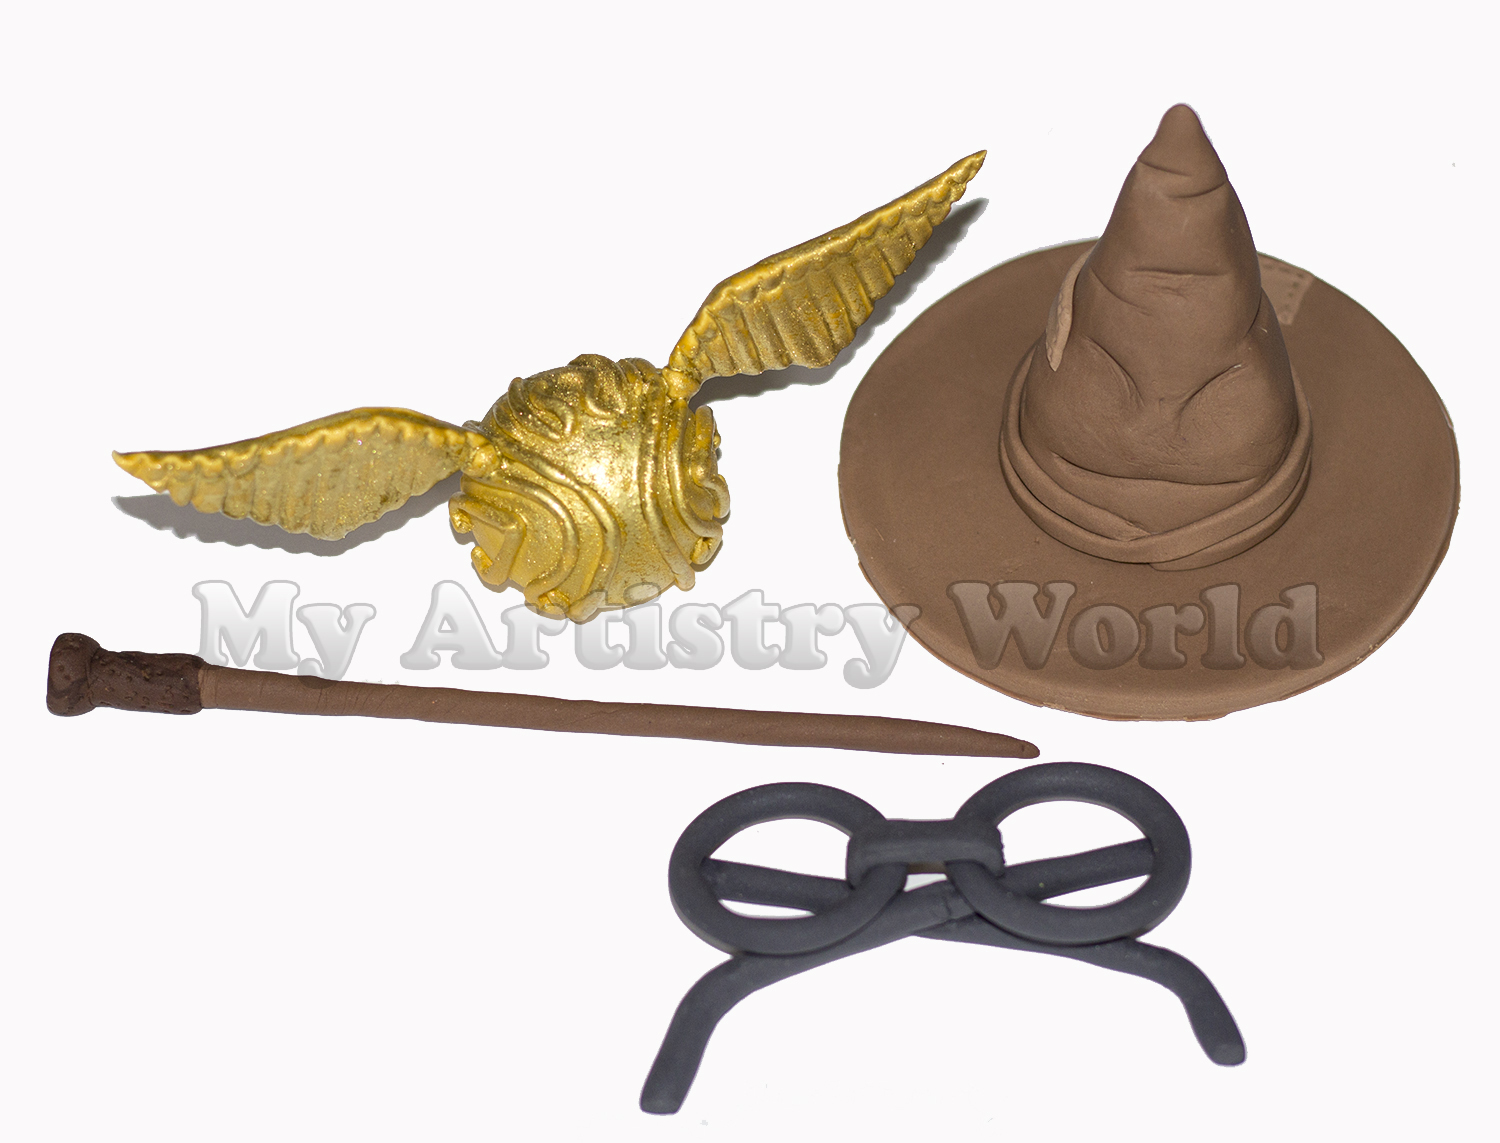 Harry Potter themed cake toppers